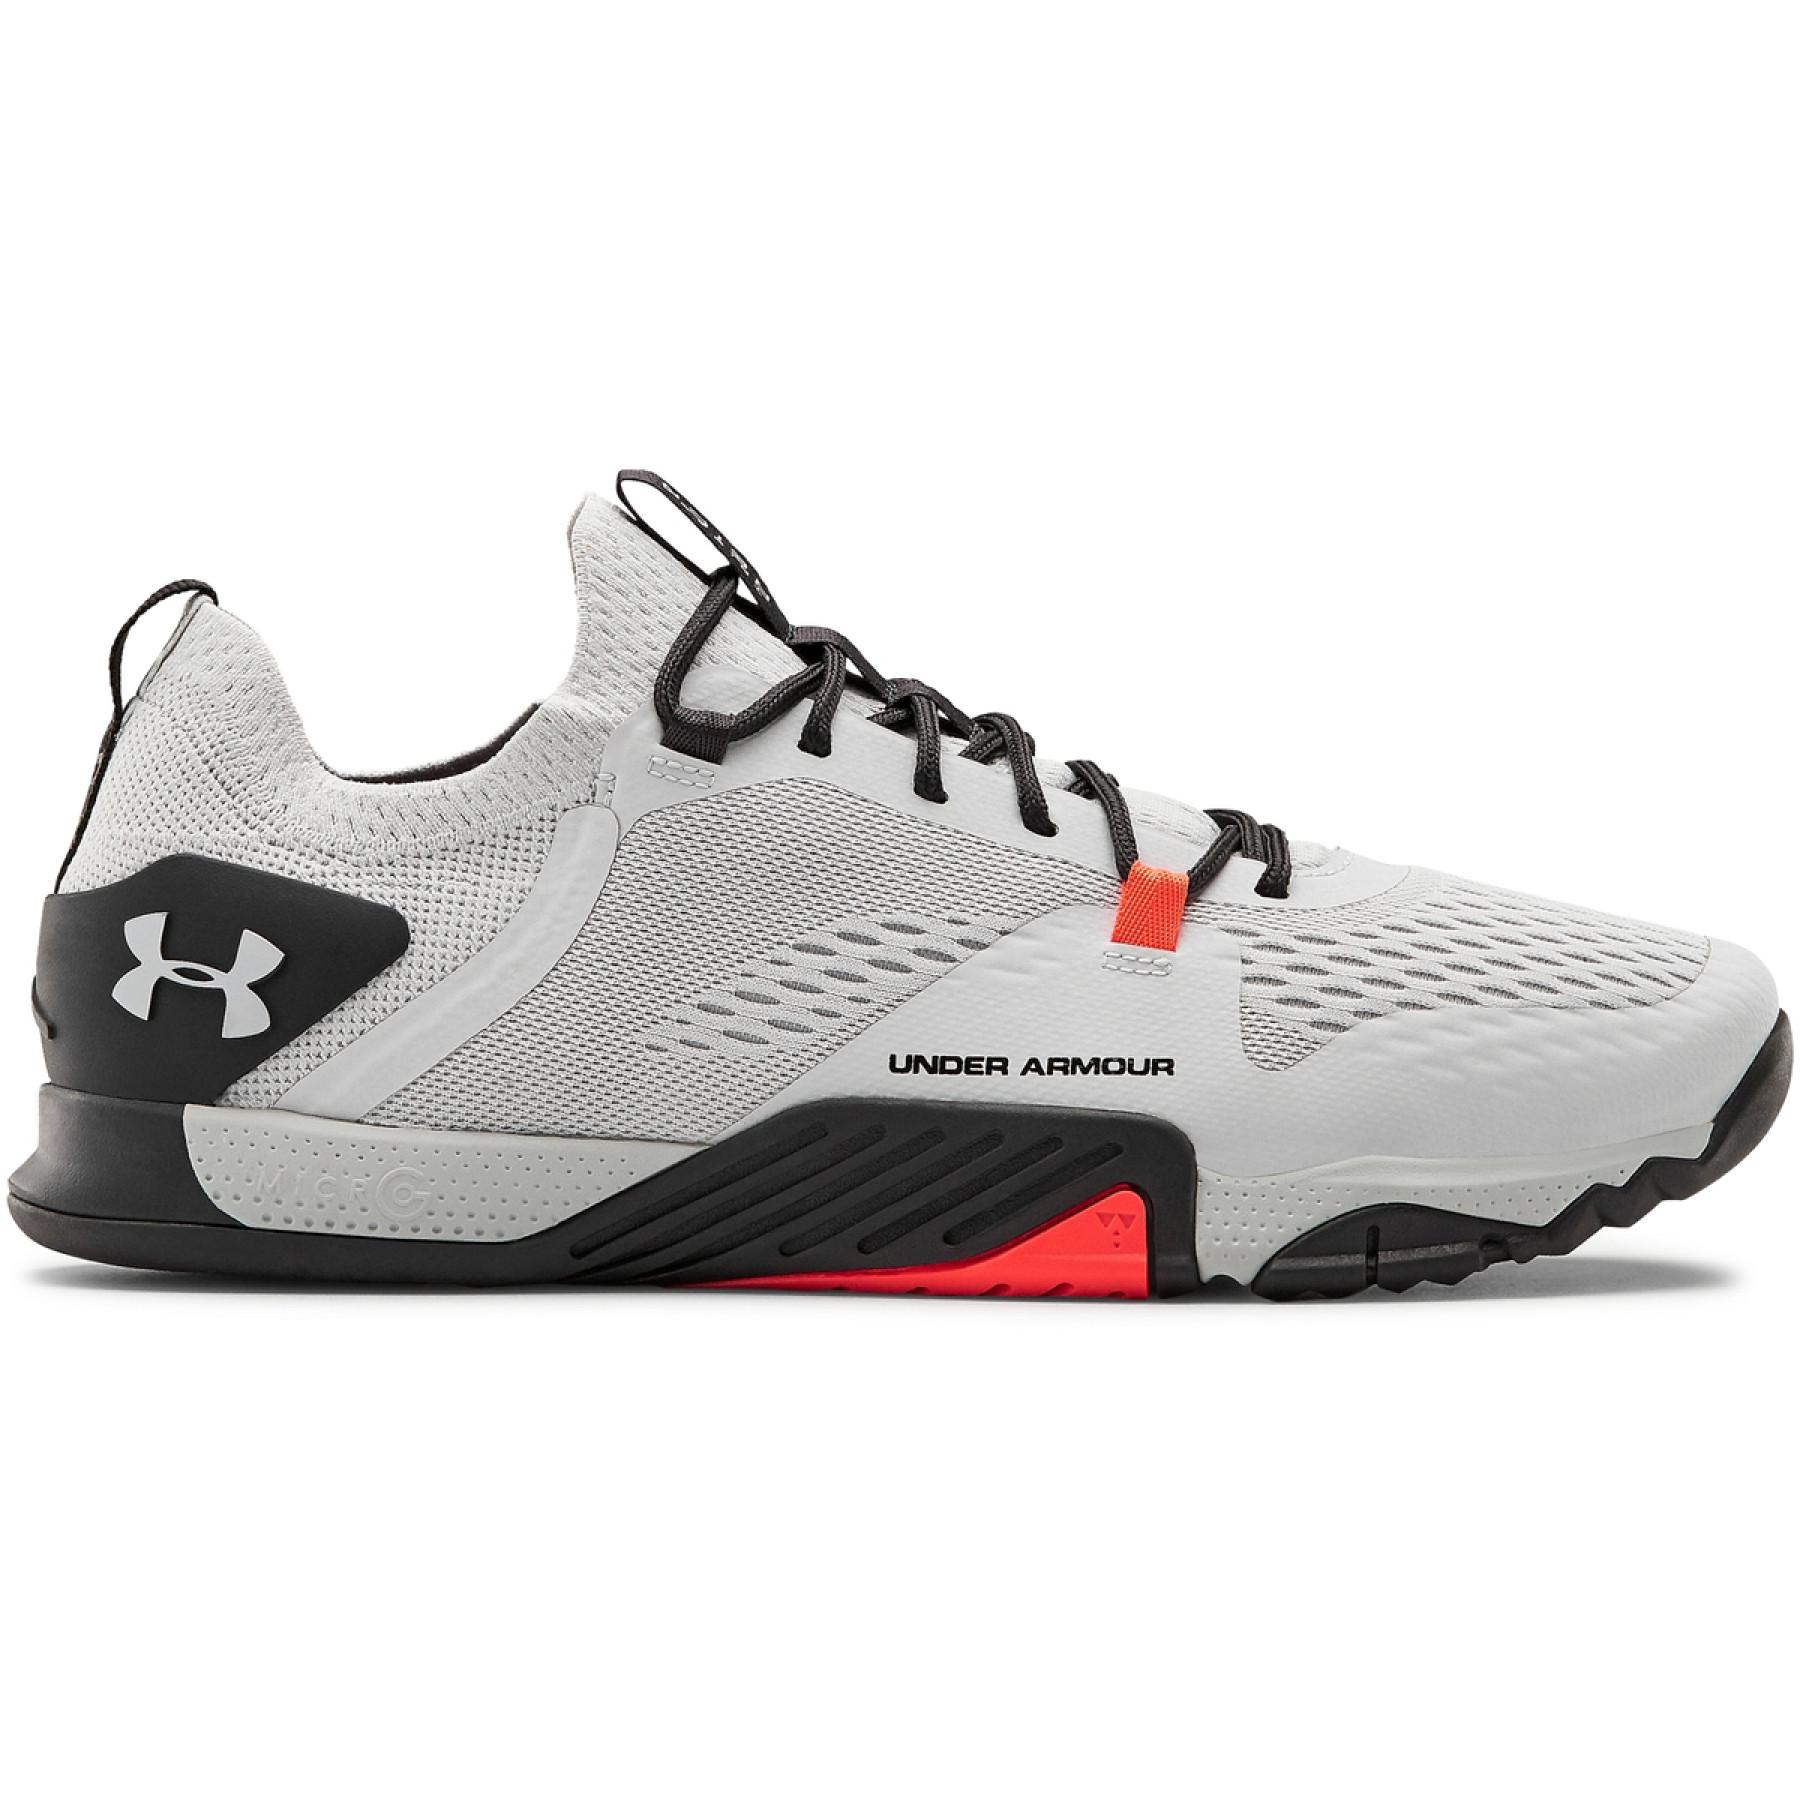 Buty treningowe Under Armour TriBase Reign 2